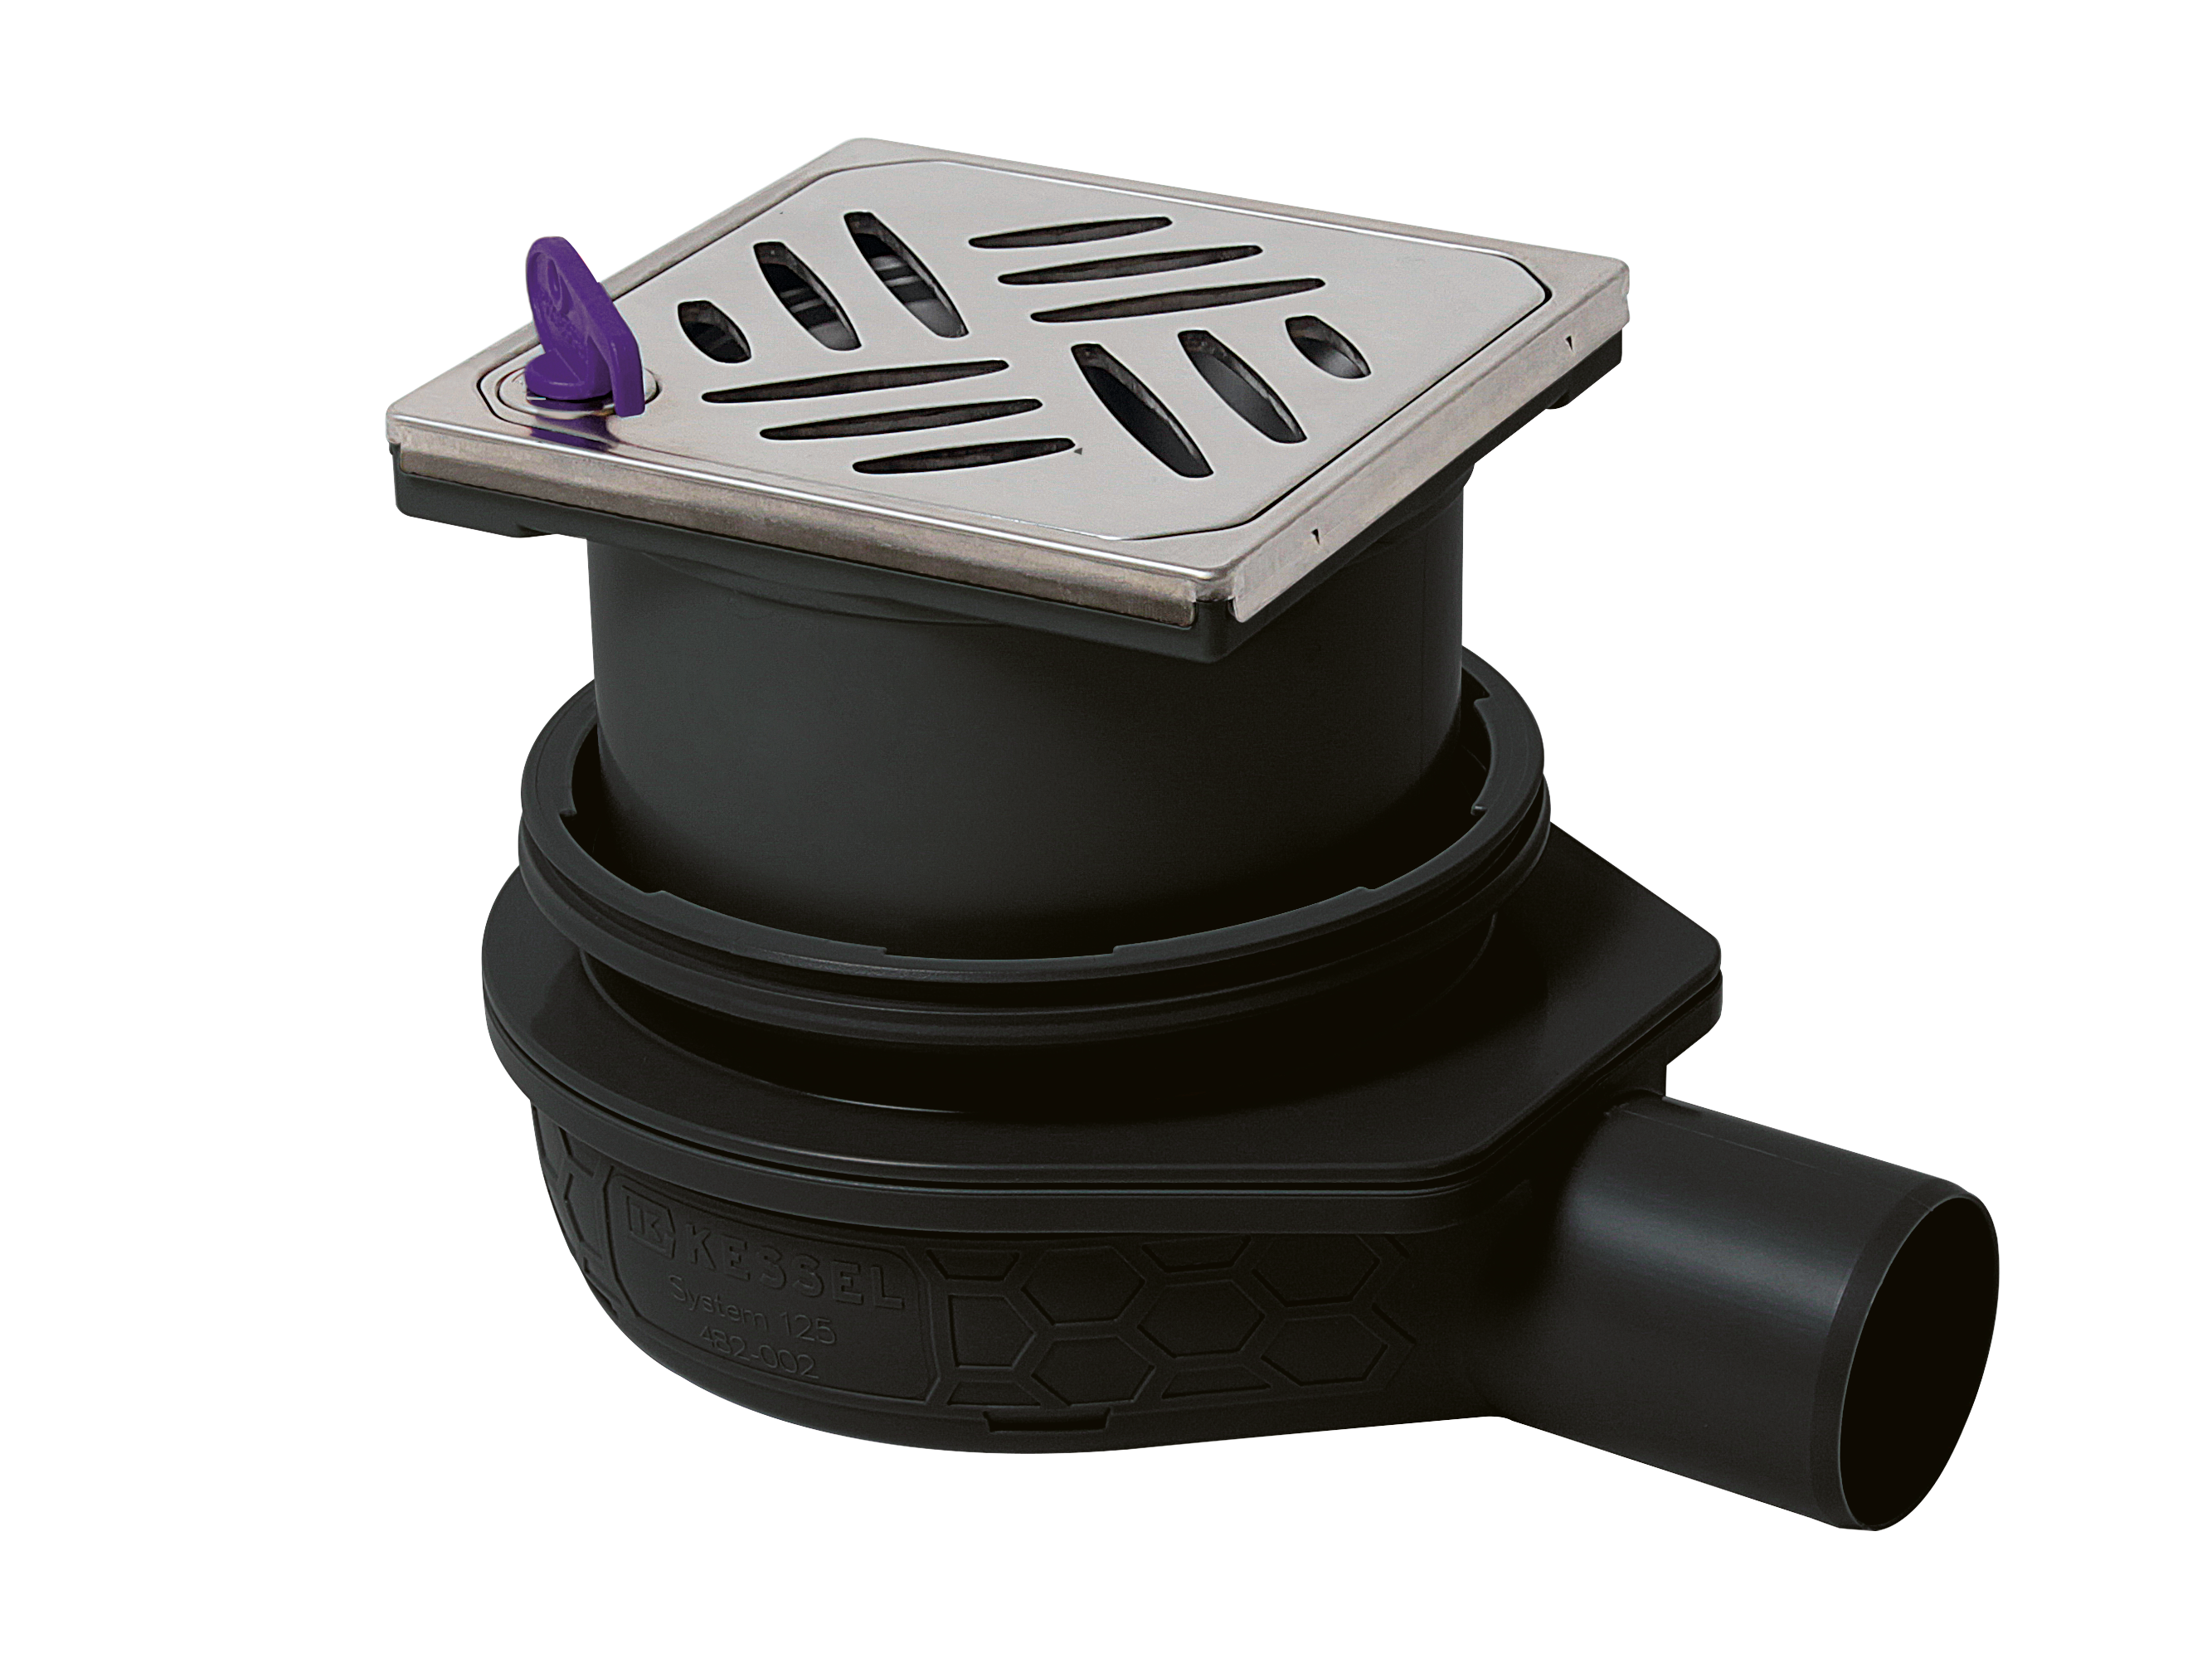 The Ultraflat 79 bathroom drain, DN 50, with a Kessel design cover, Lock & Lift locking system and Megastop